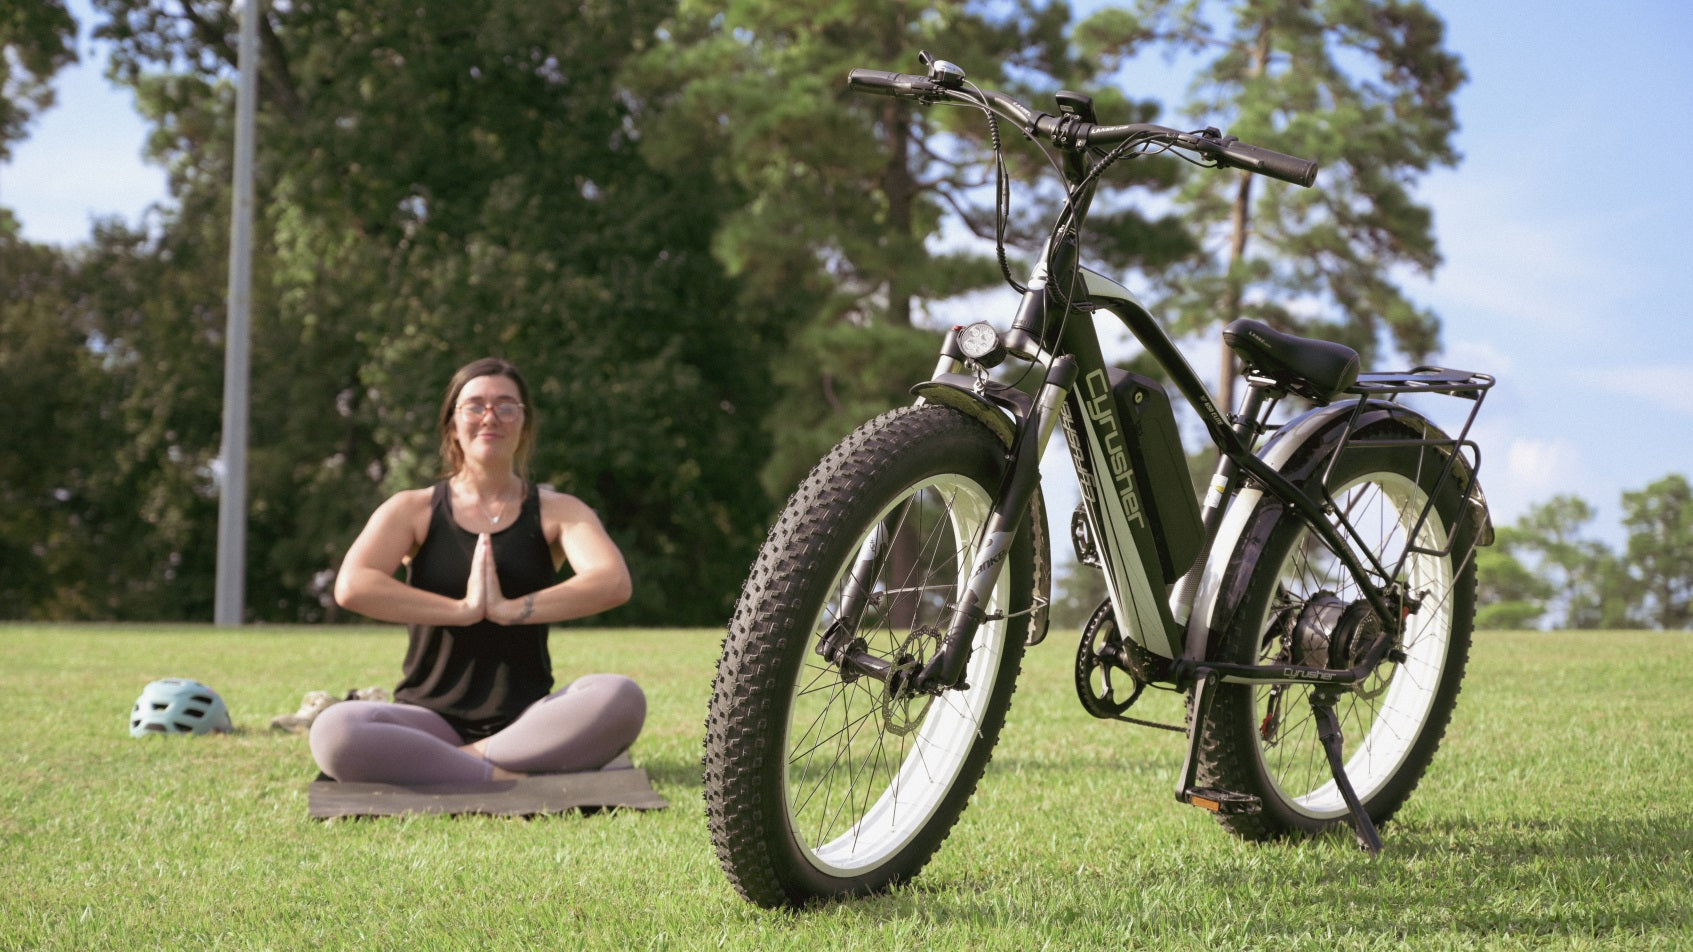  How E-Bikes Boost Fitness and Well-Being